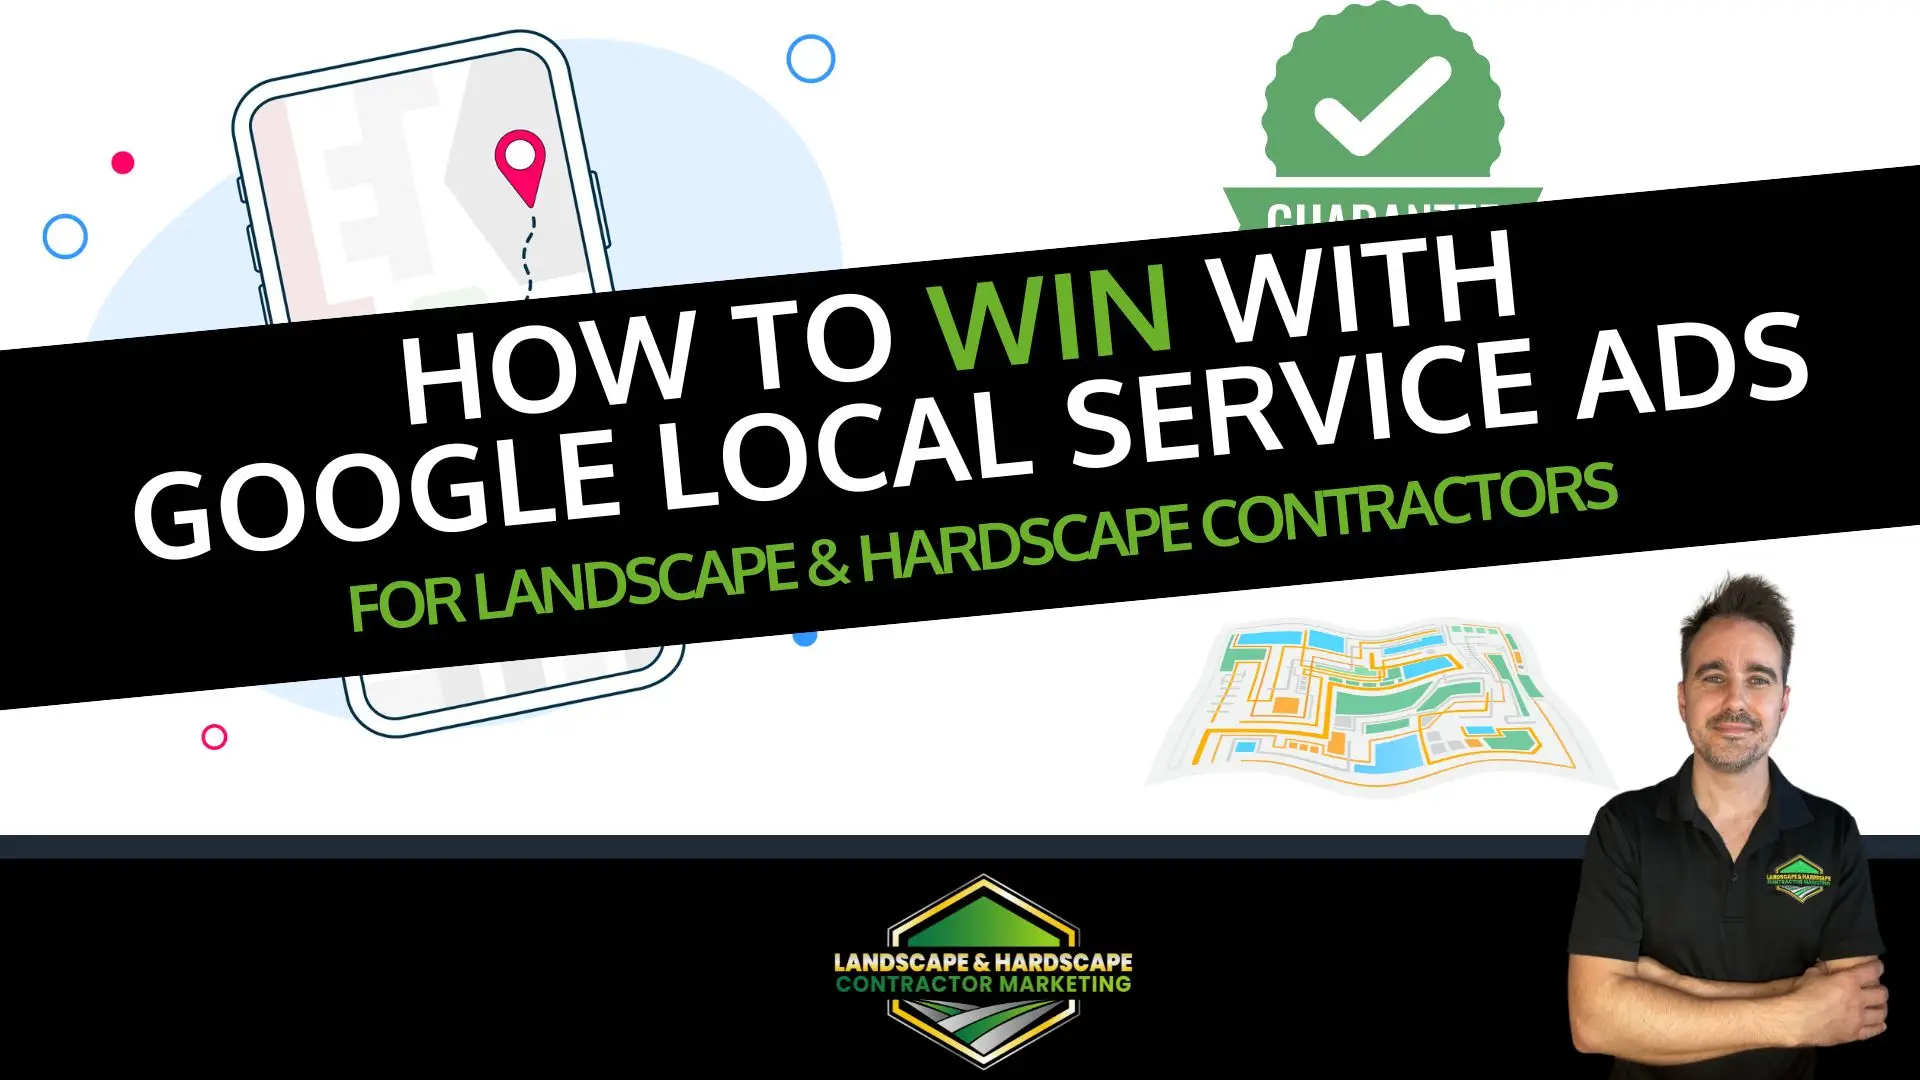 How to WIN with Google Local Service Ads for Landscape Hardscape Contractors